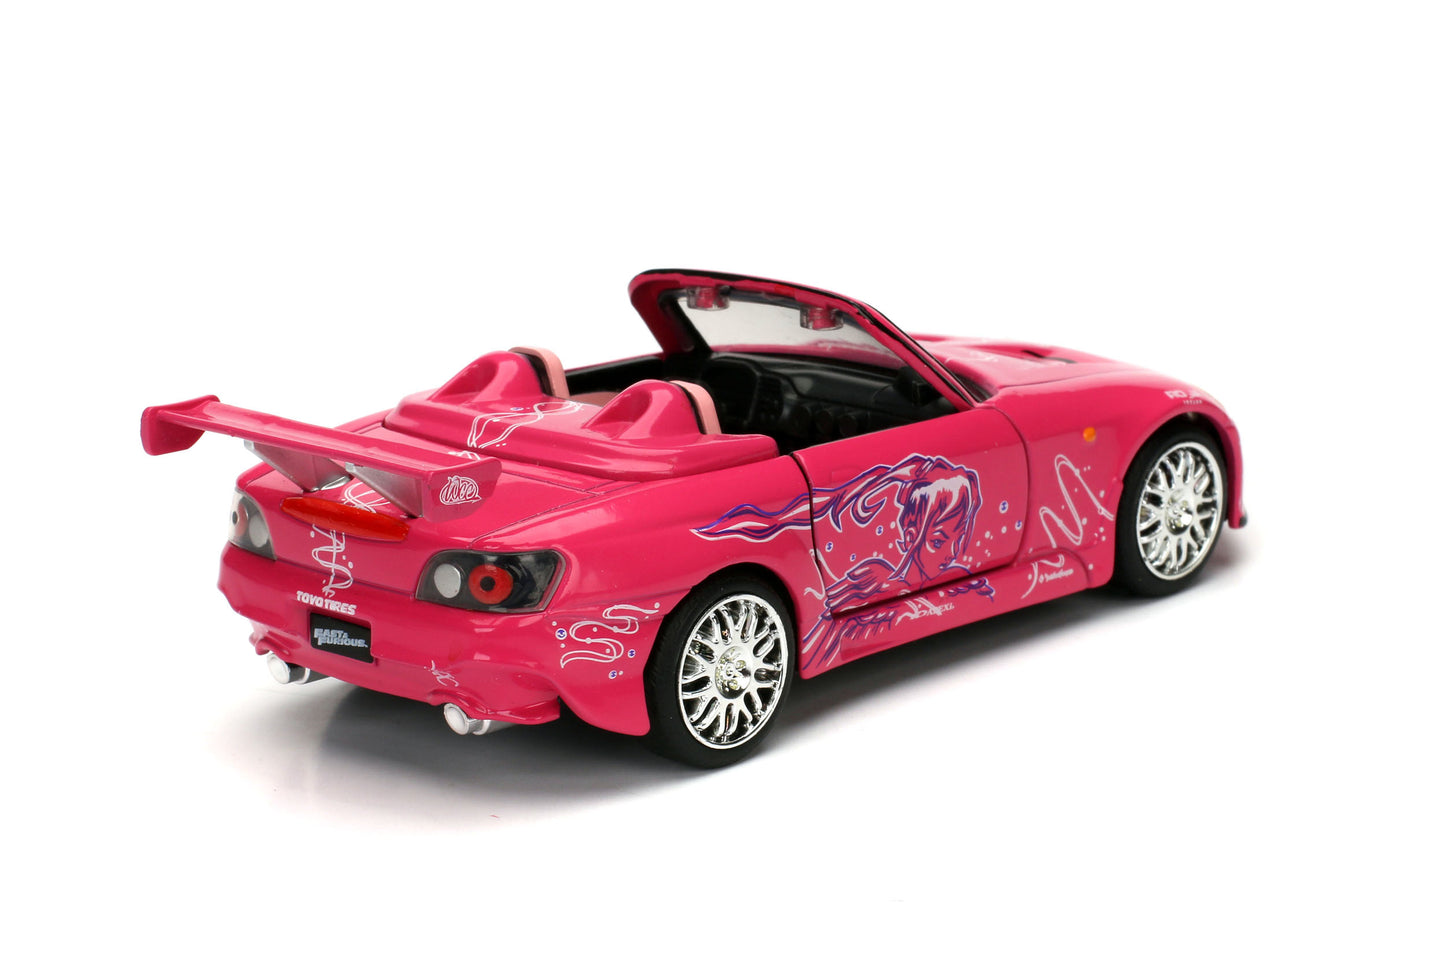 Suki's Honda S2000 Convertible Pink with Graphics "Fast & Furious" Movie 1/32 Diecast Model Car by Jada